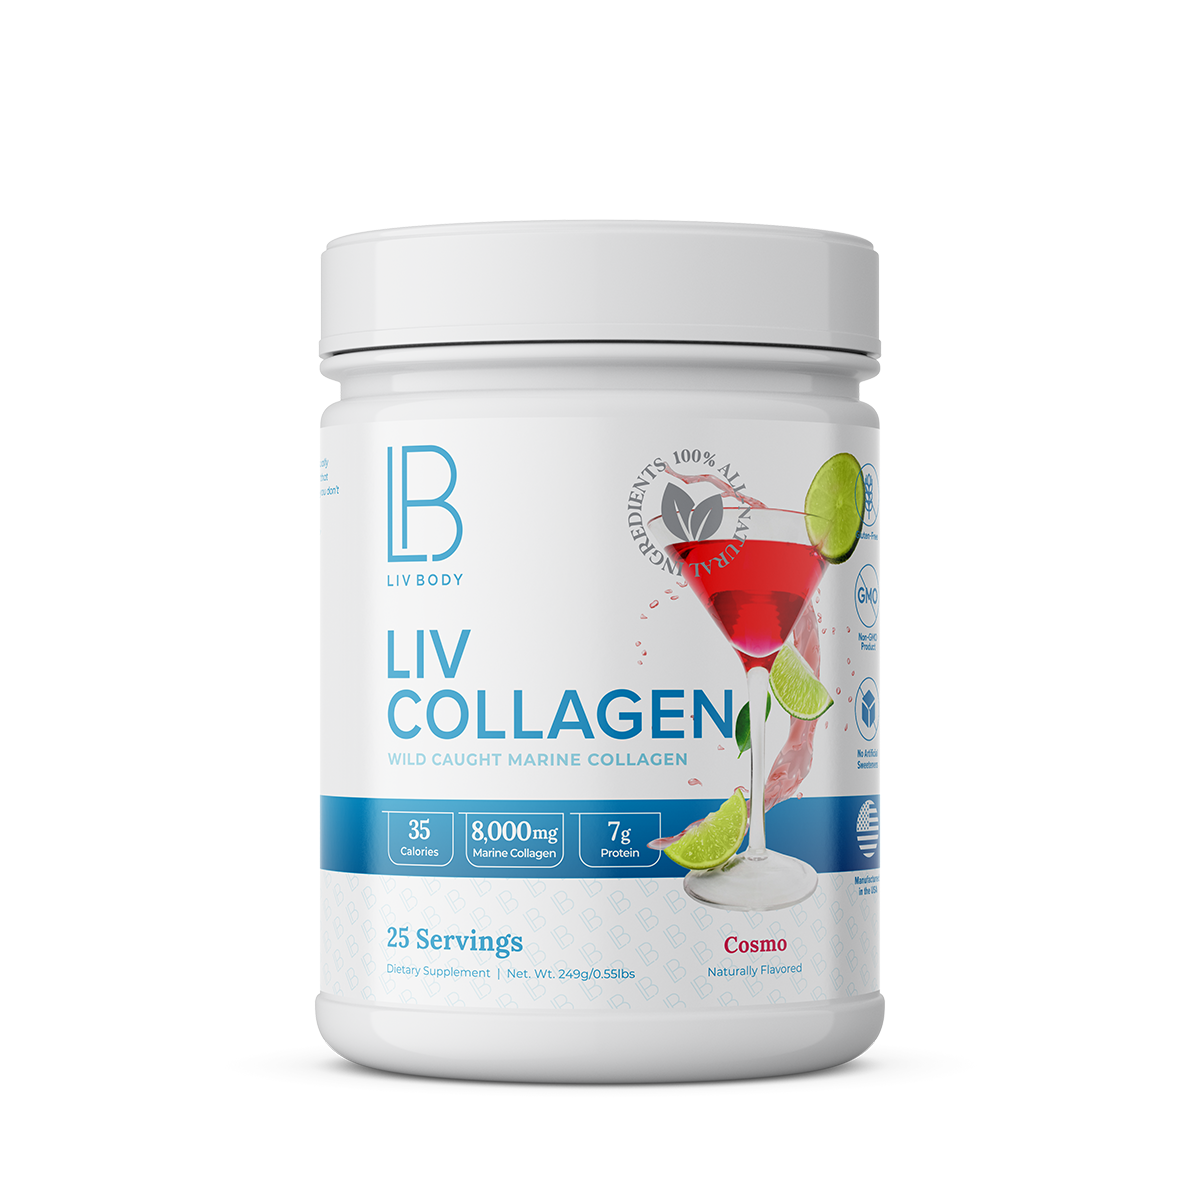 Picture of LIV Marine Collagen, choice supplements for muscle recovery.